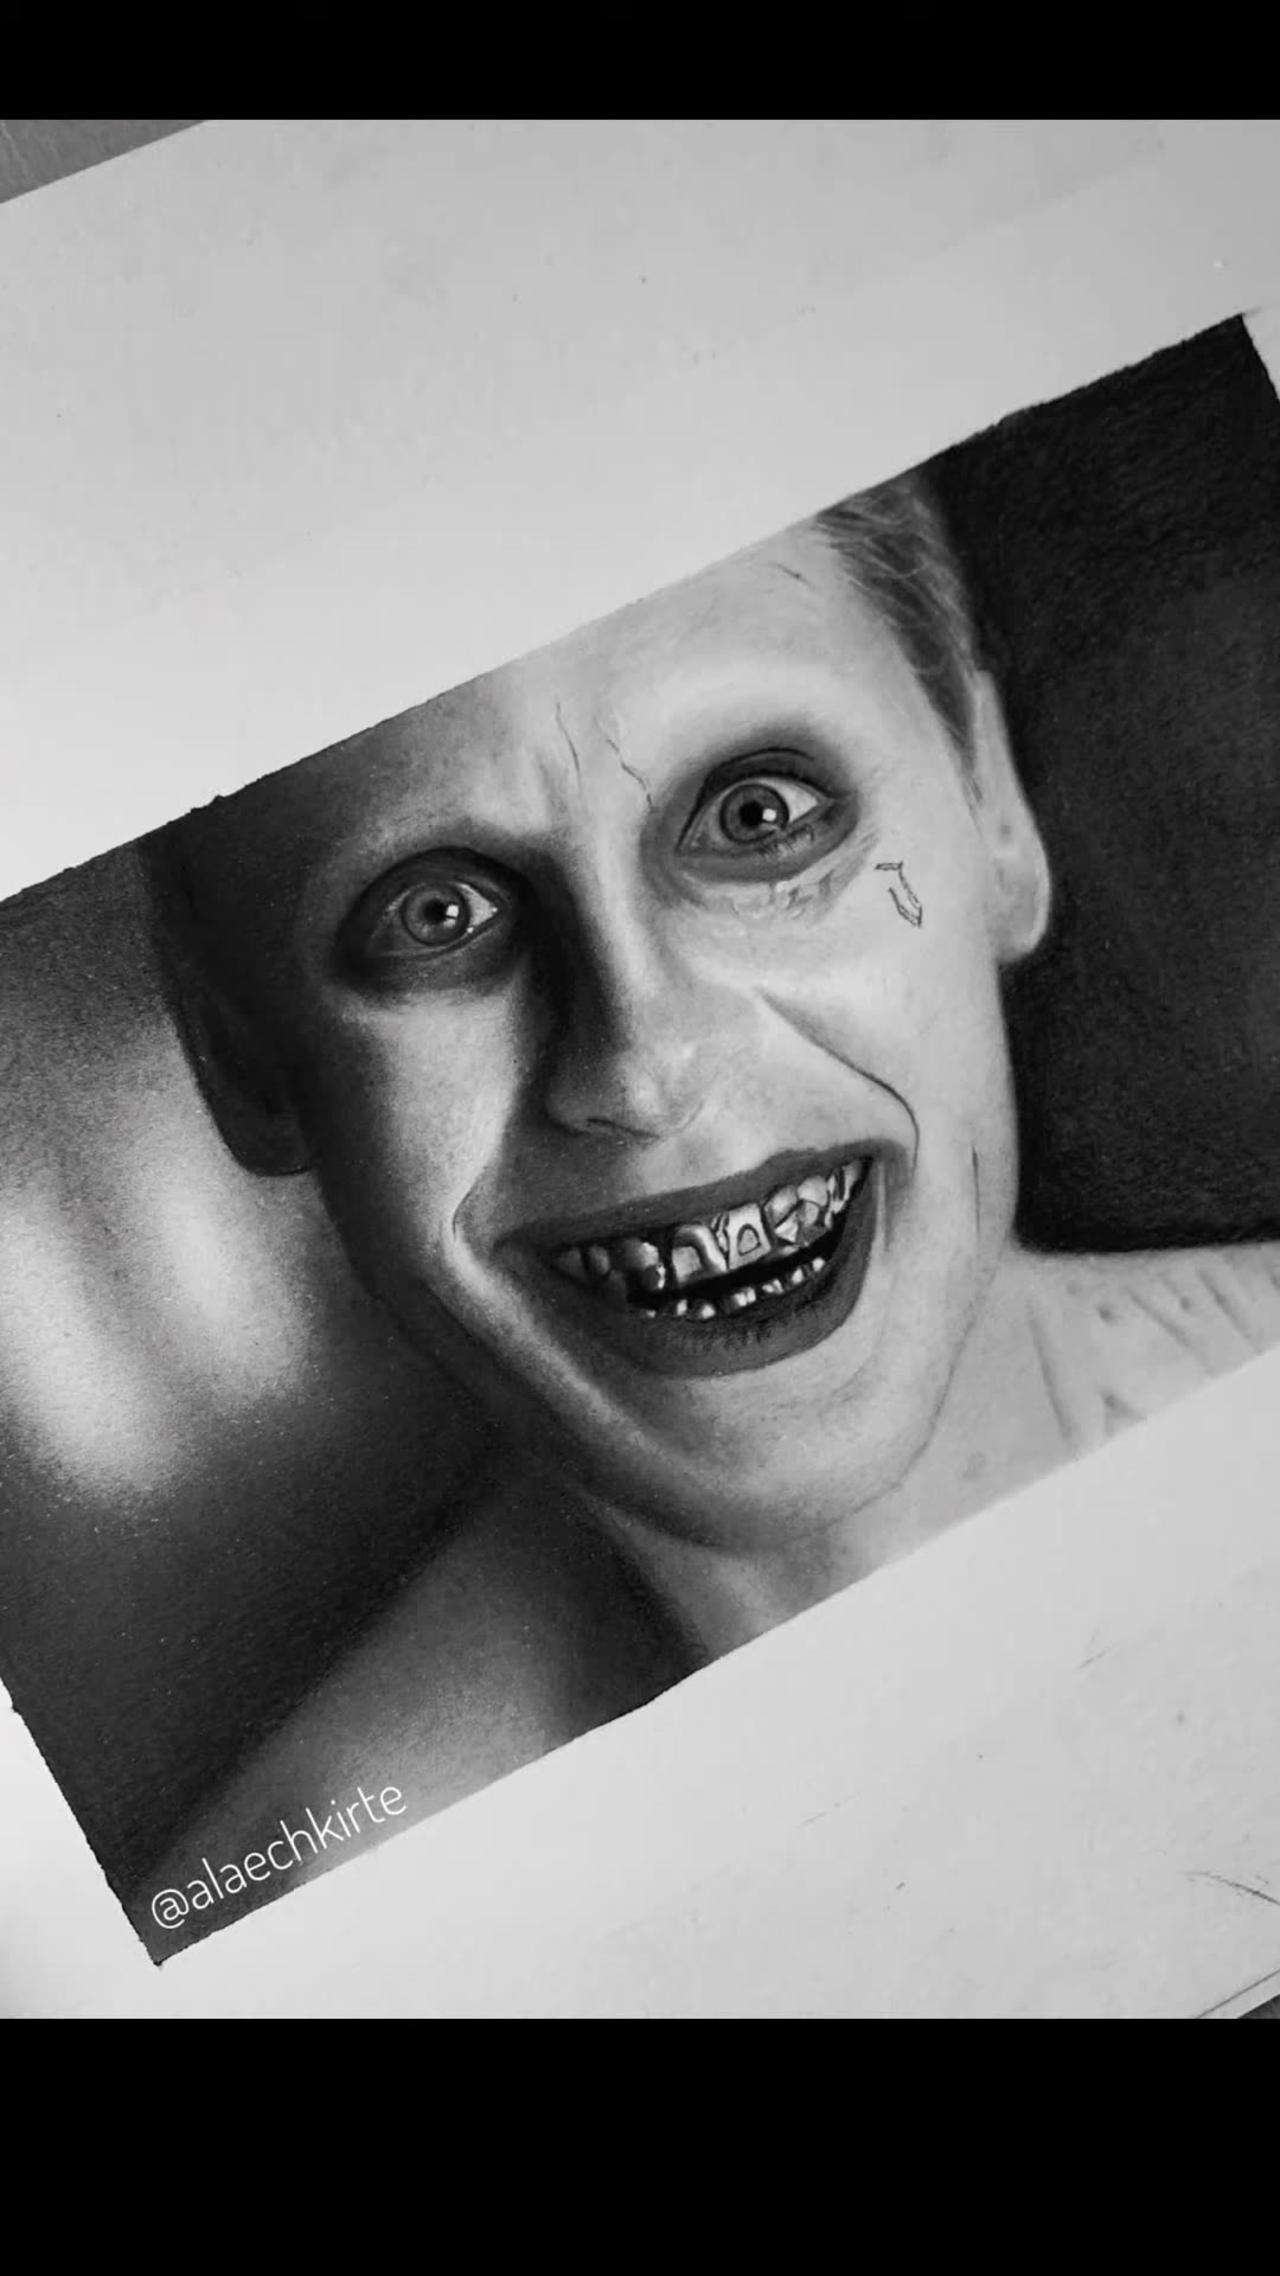 Drawing Pencil - JOKER, Jared Leto in Suicide Squad